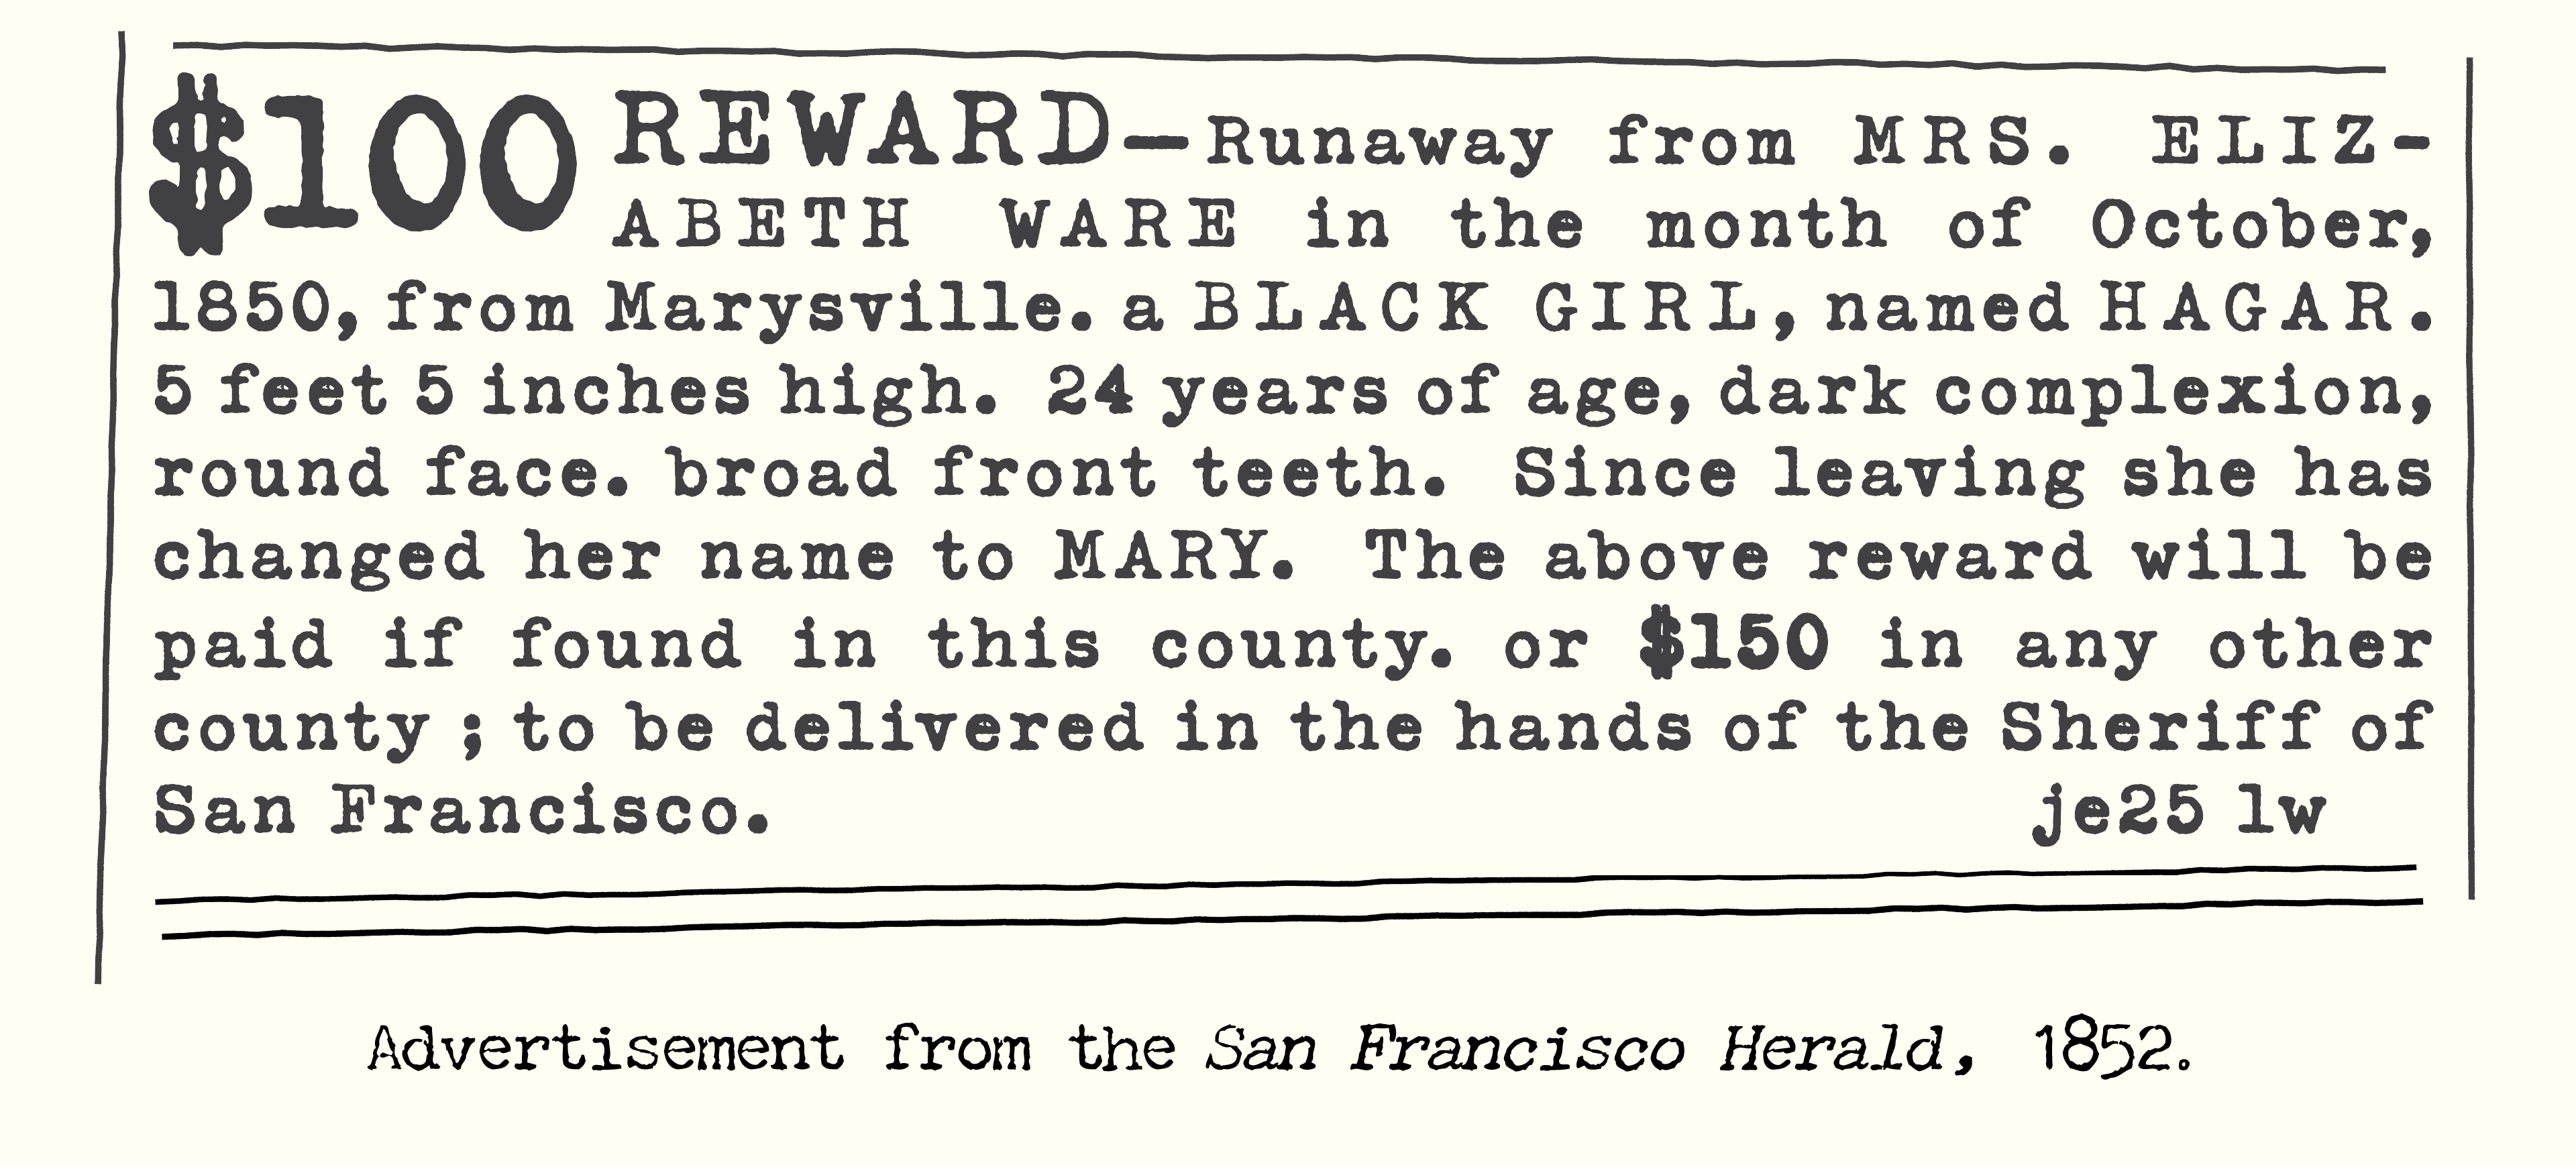 Advertisement from the San Francisco Herald, 1852